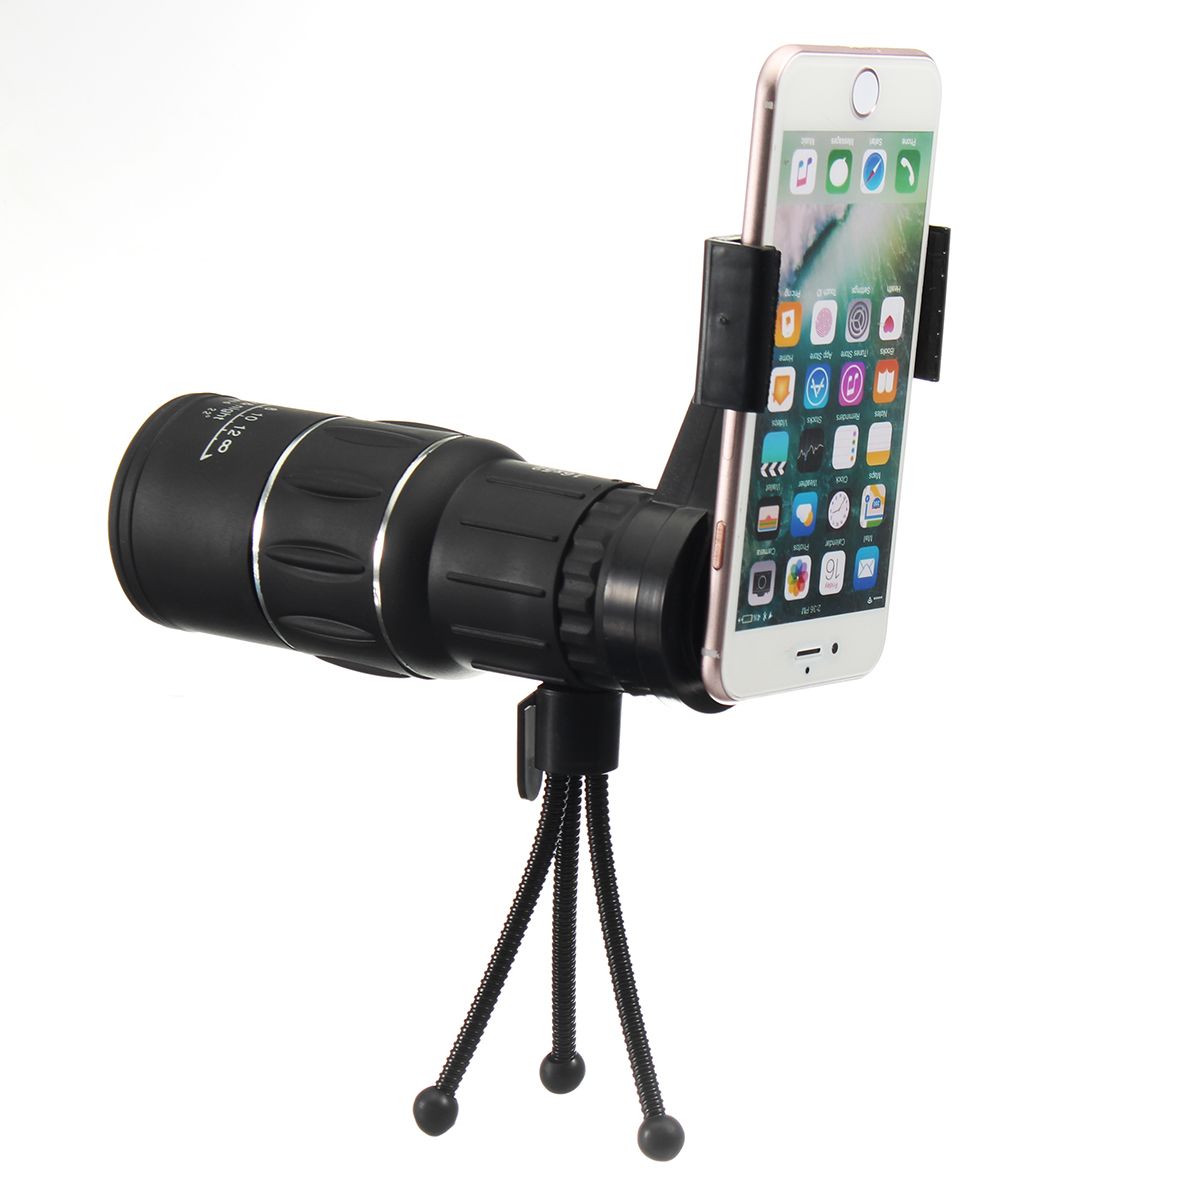 16X-Magnification-16x52-Telescope-Telephoto-Lens-with-Tripod-for-Mobile-Phone-Smartphone-Photography-1633173